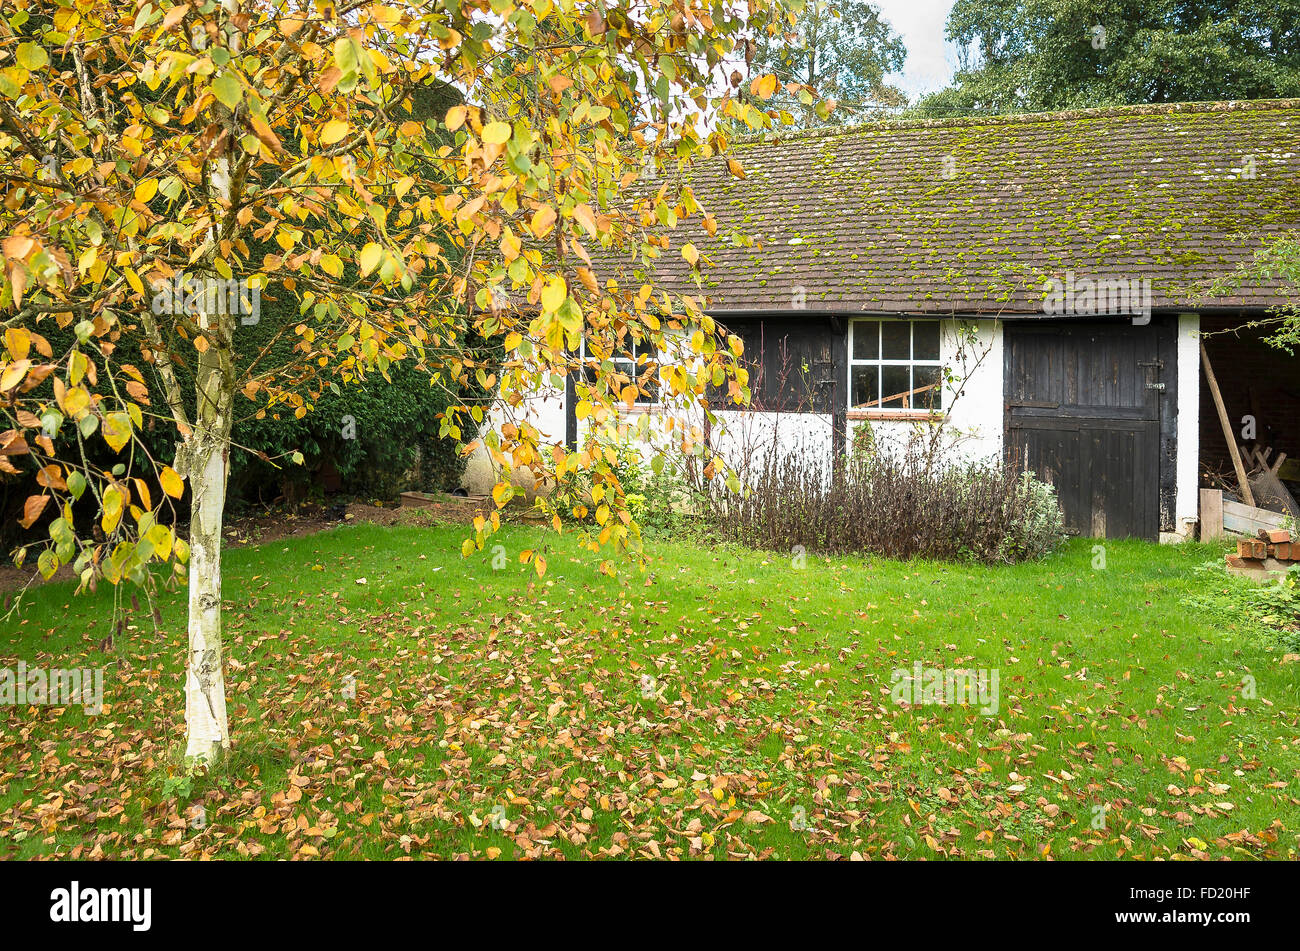 Autumn leaves falling from a silver birch tree in an English garden Stock Photo